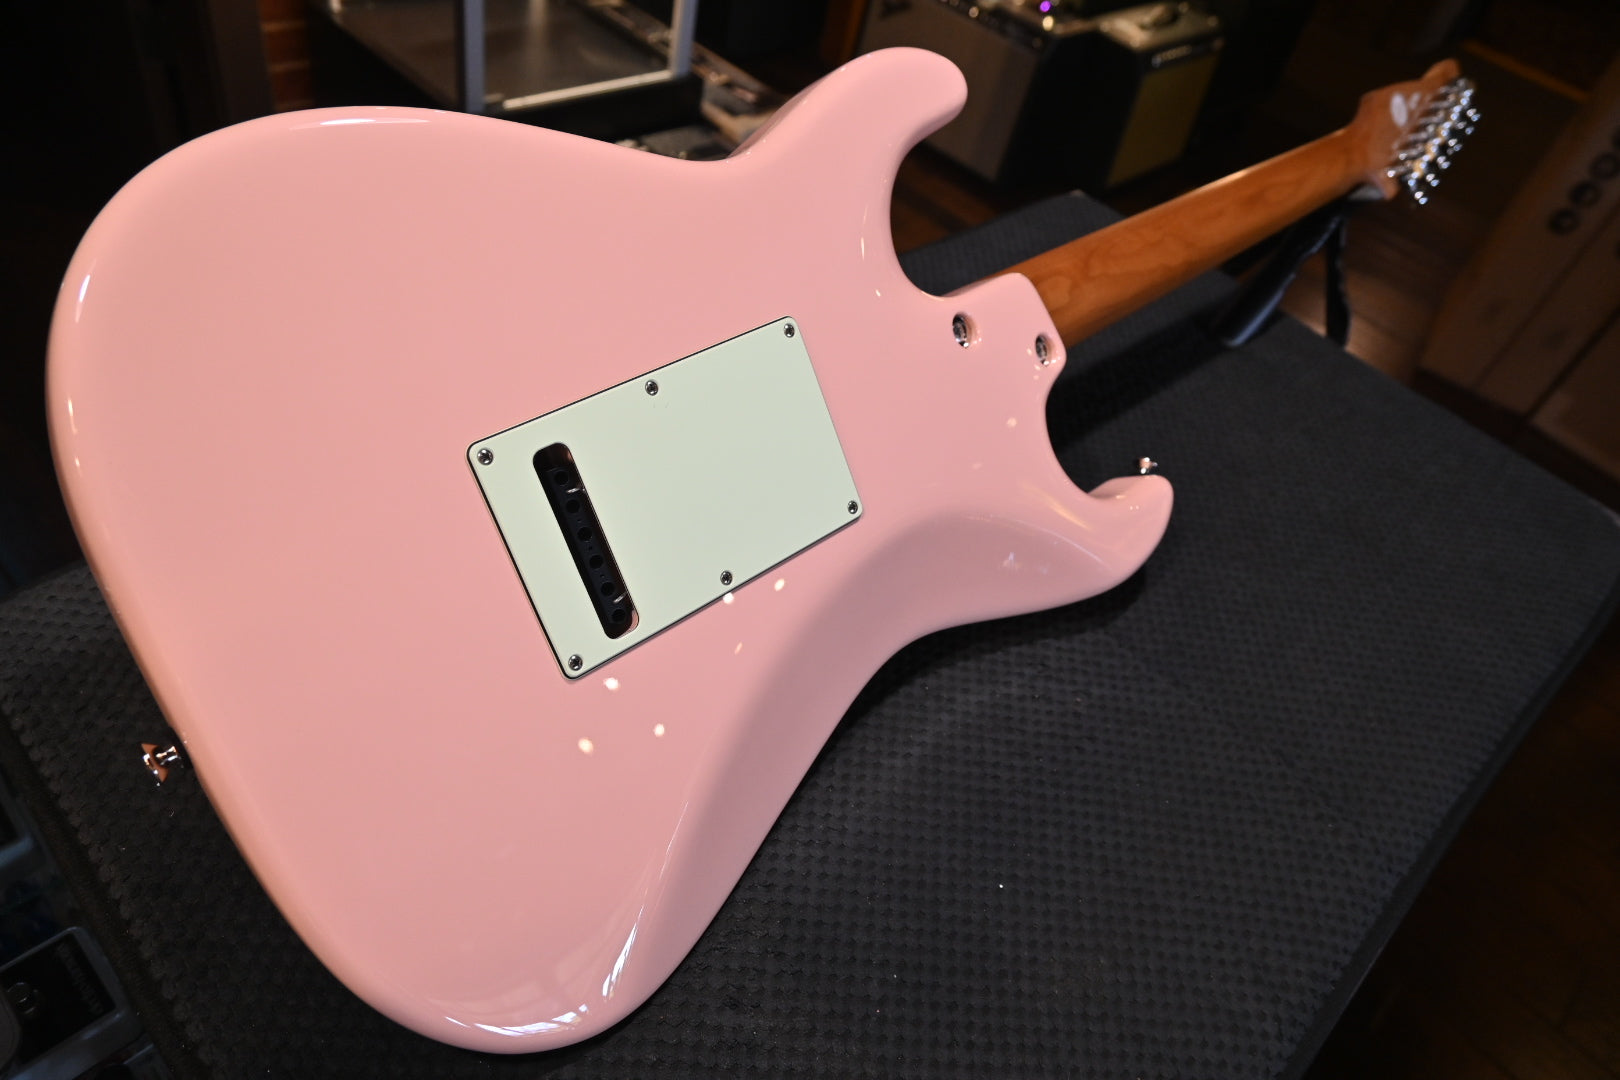 Tom Anderson Icon Classic - Shell Pink Guitar #124M - Danville Music